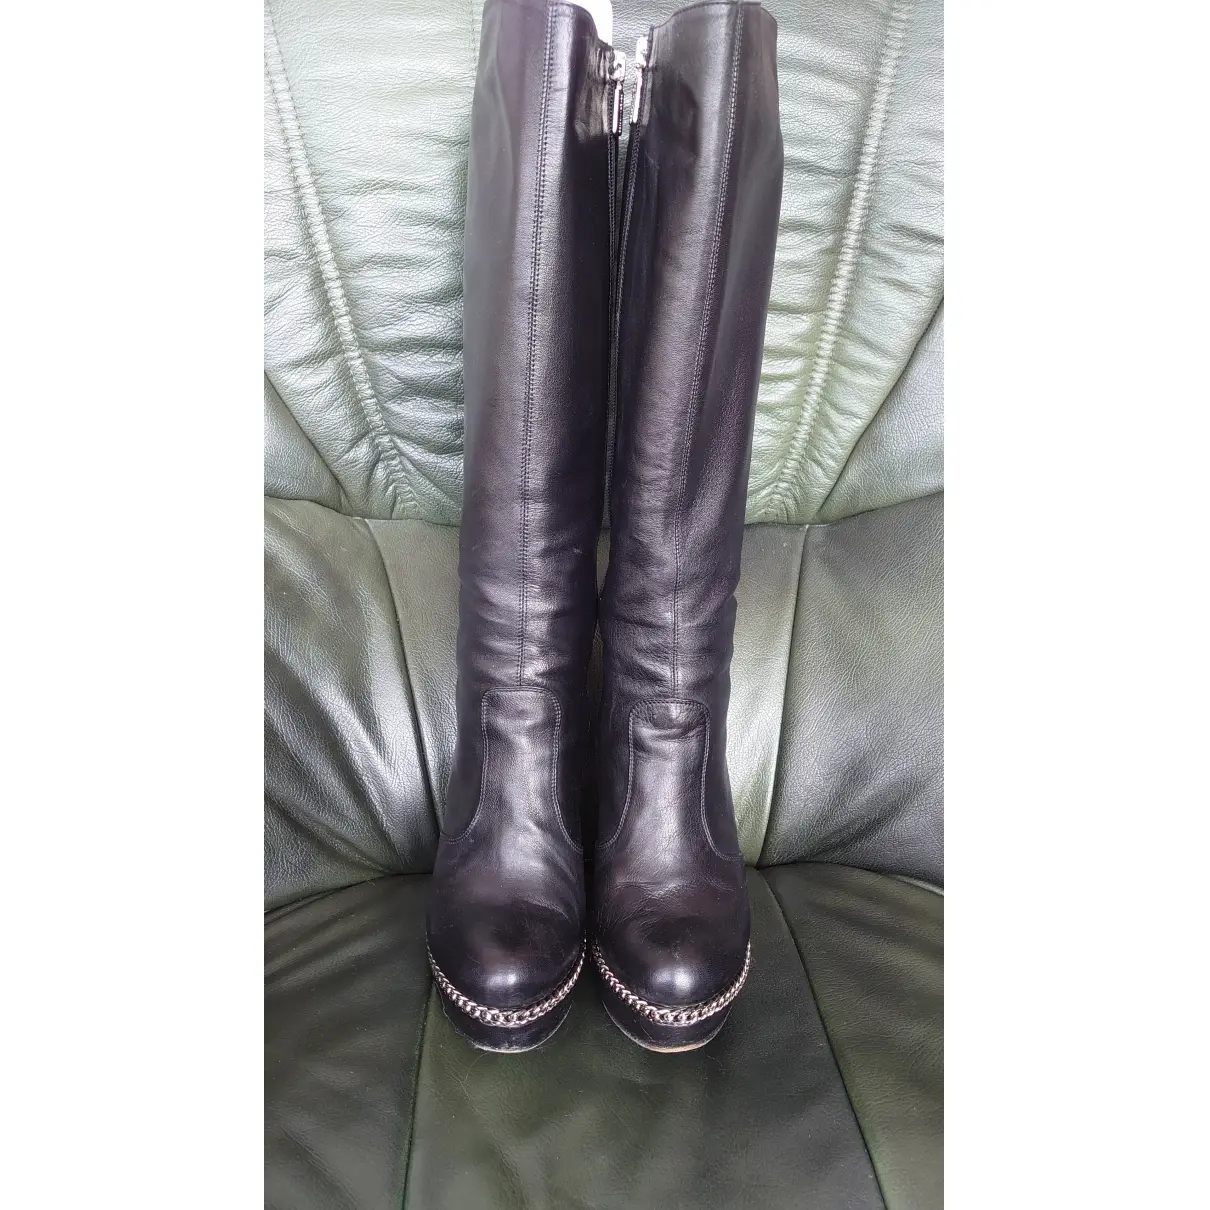 Buy Bruno Magli Leather riding boots online